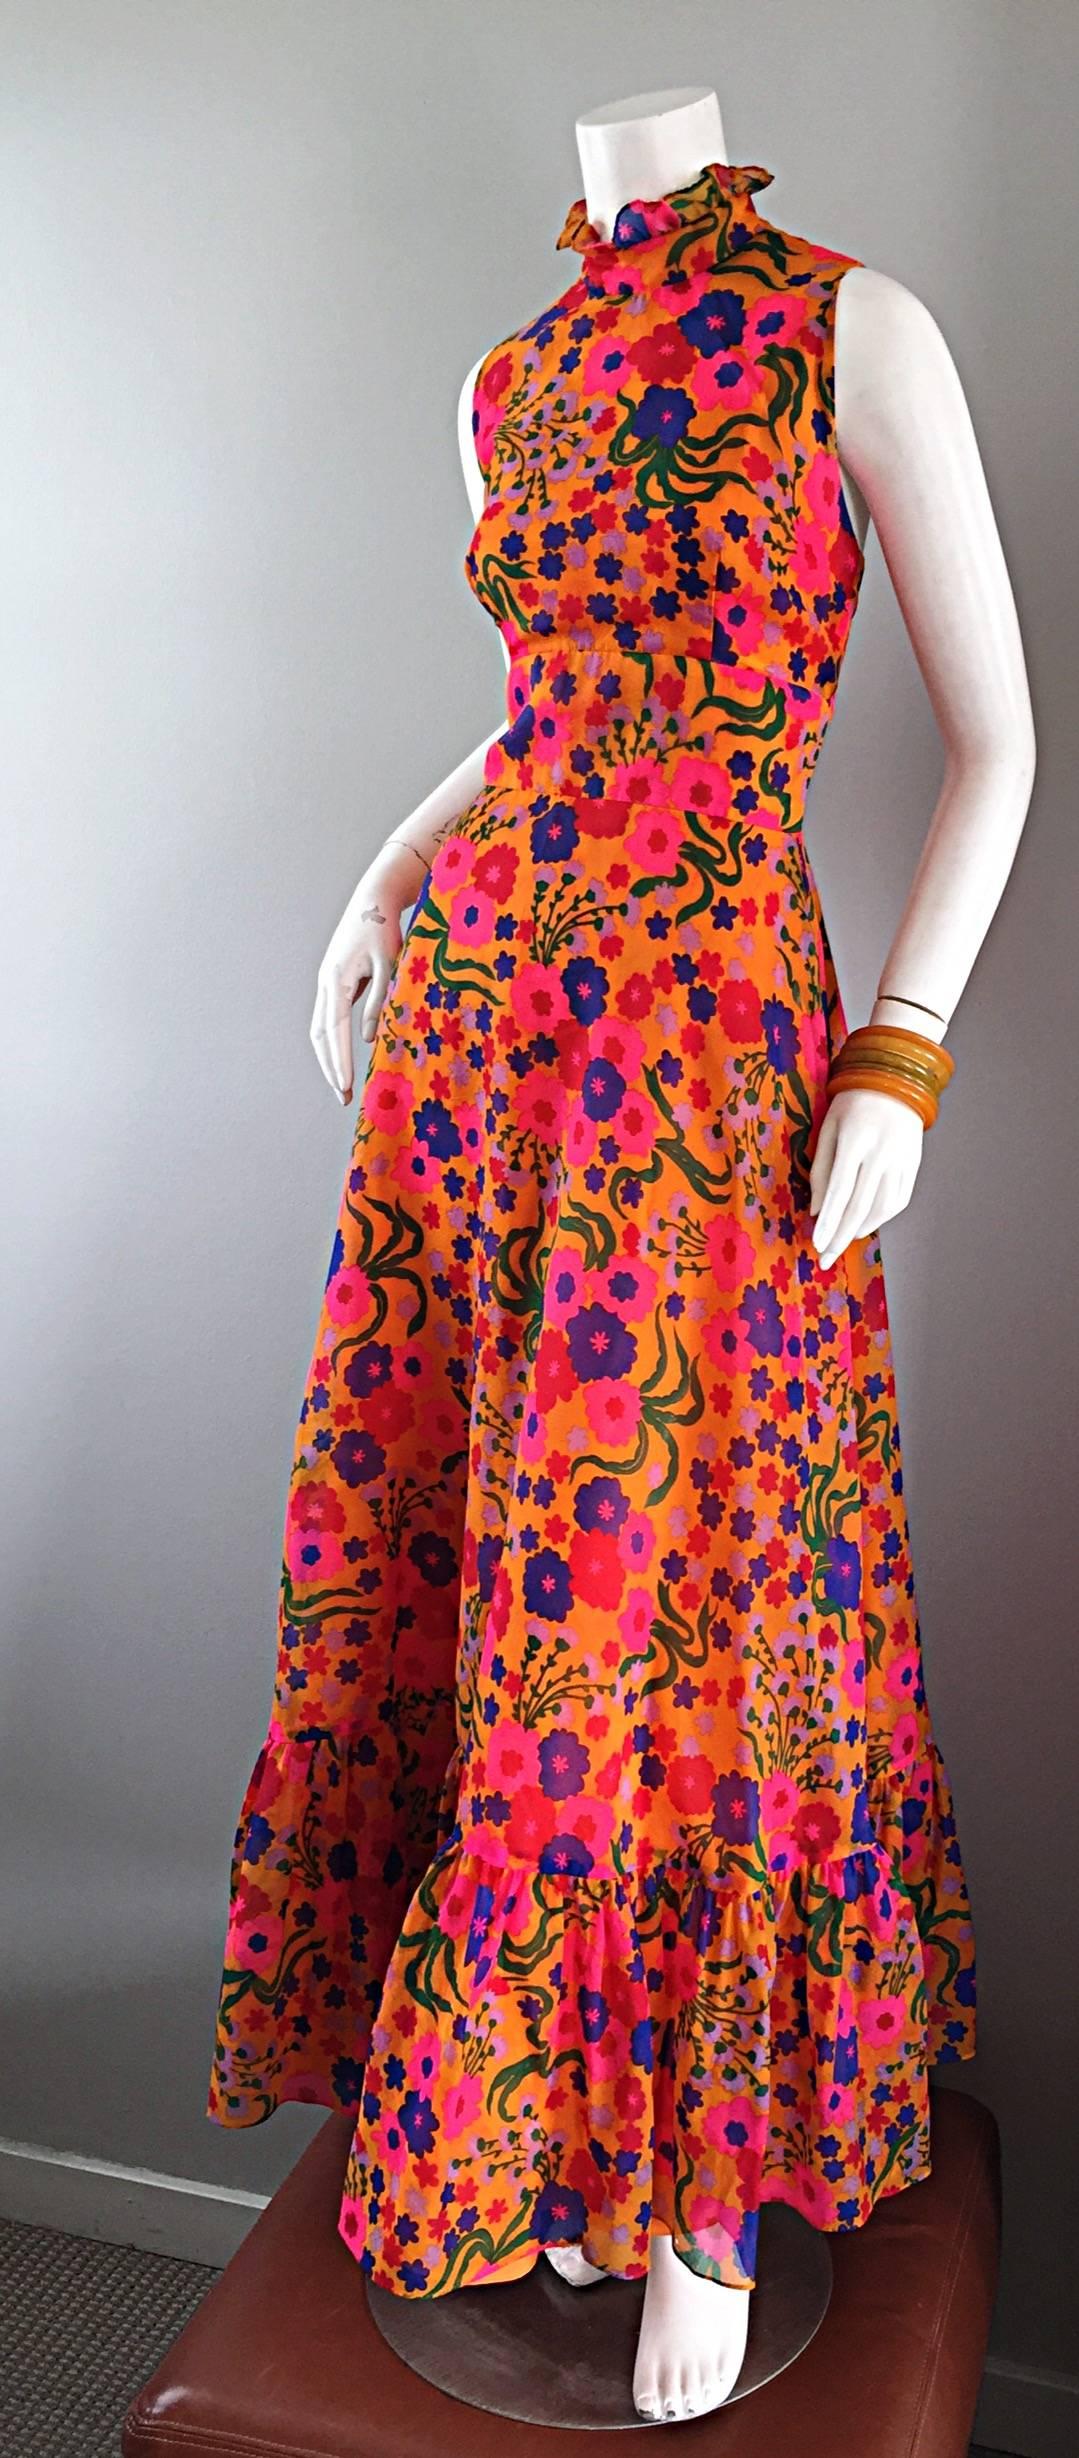 Amazing 1970s 70s Colorful Psychedelic Chiffon Floral Ruffle Vintage Maxi Dress 1